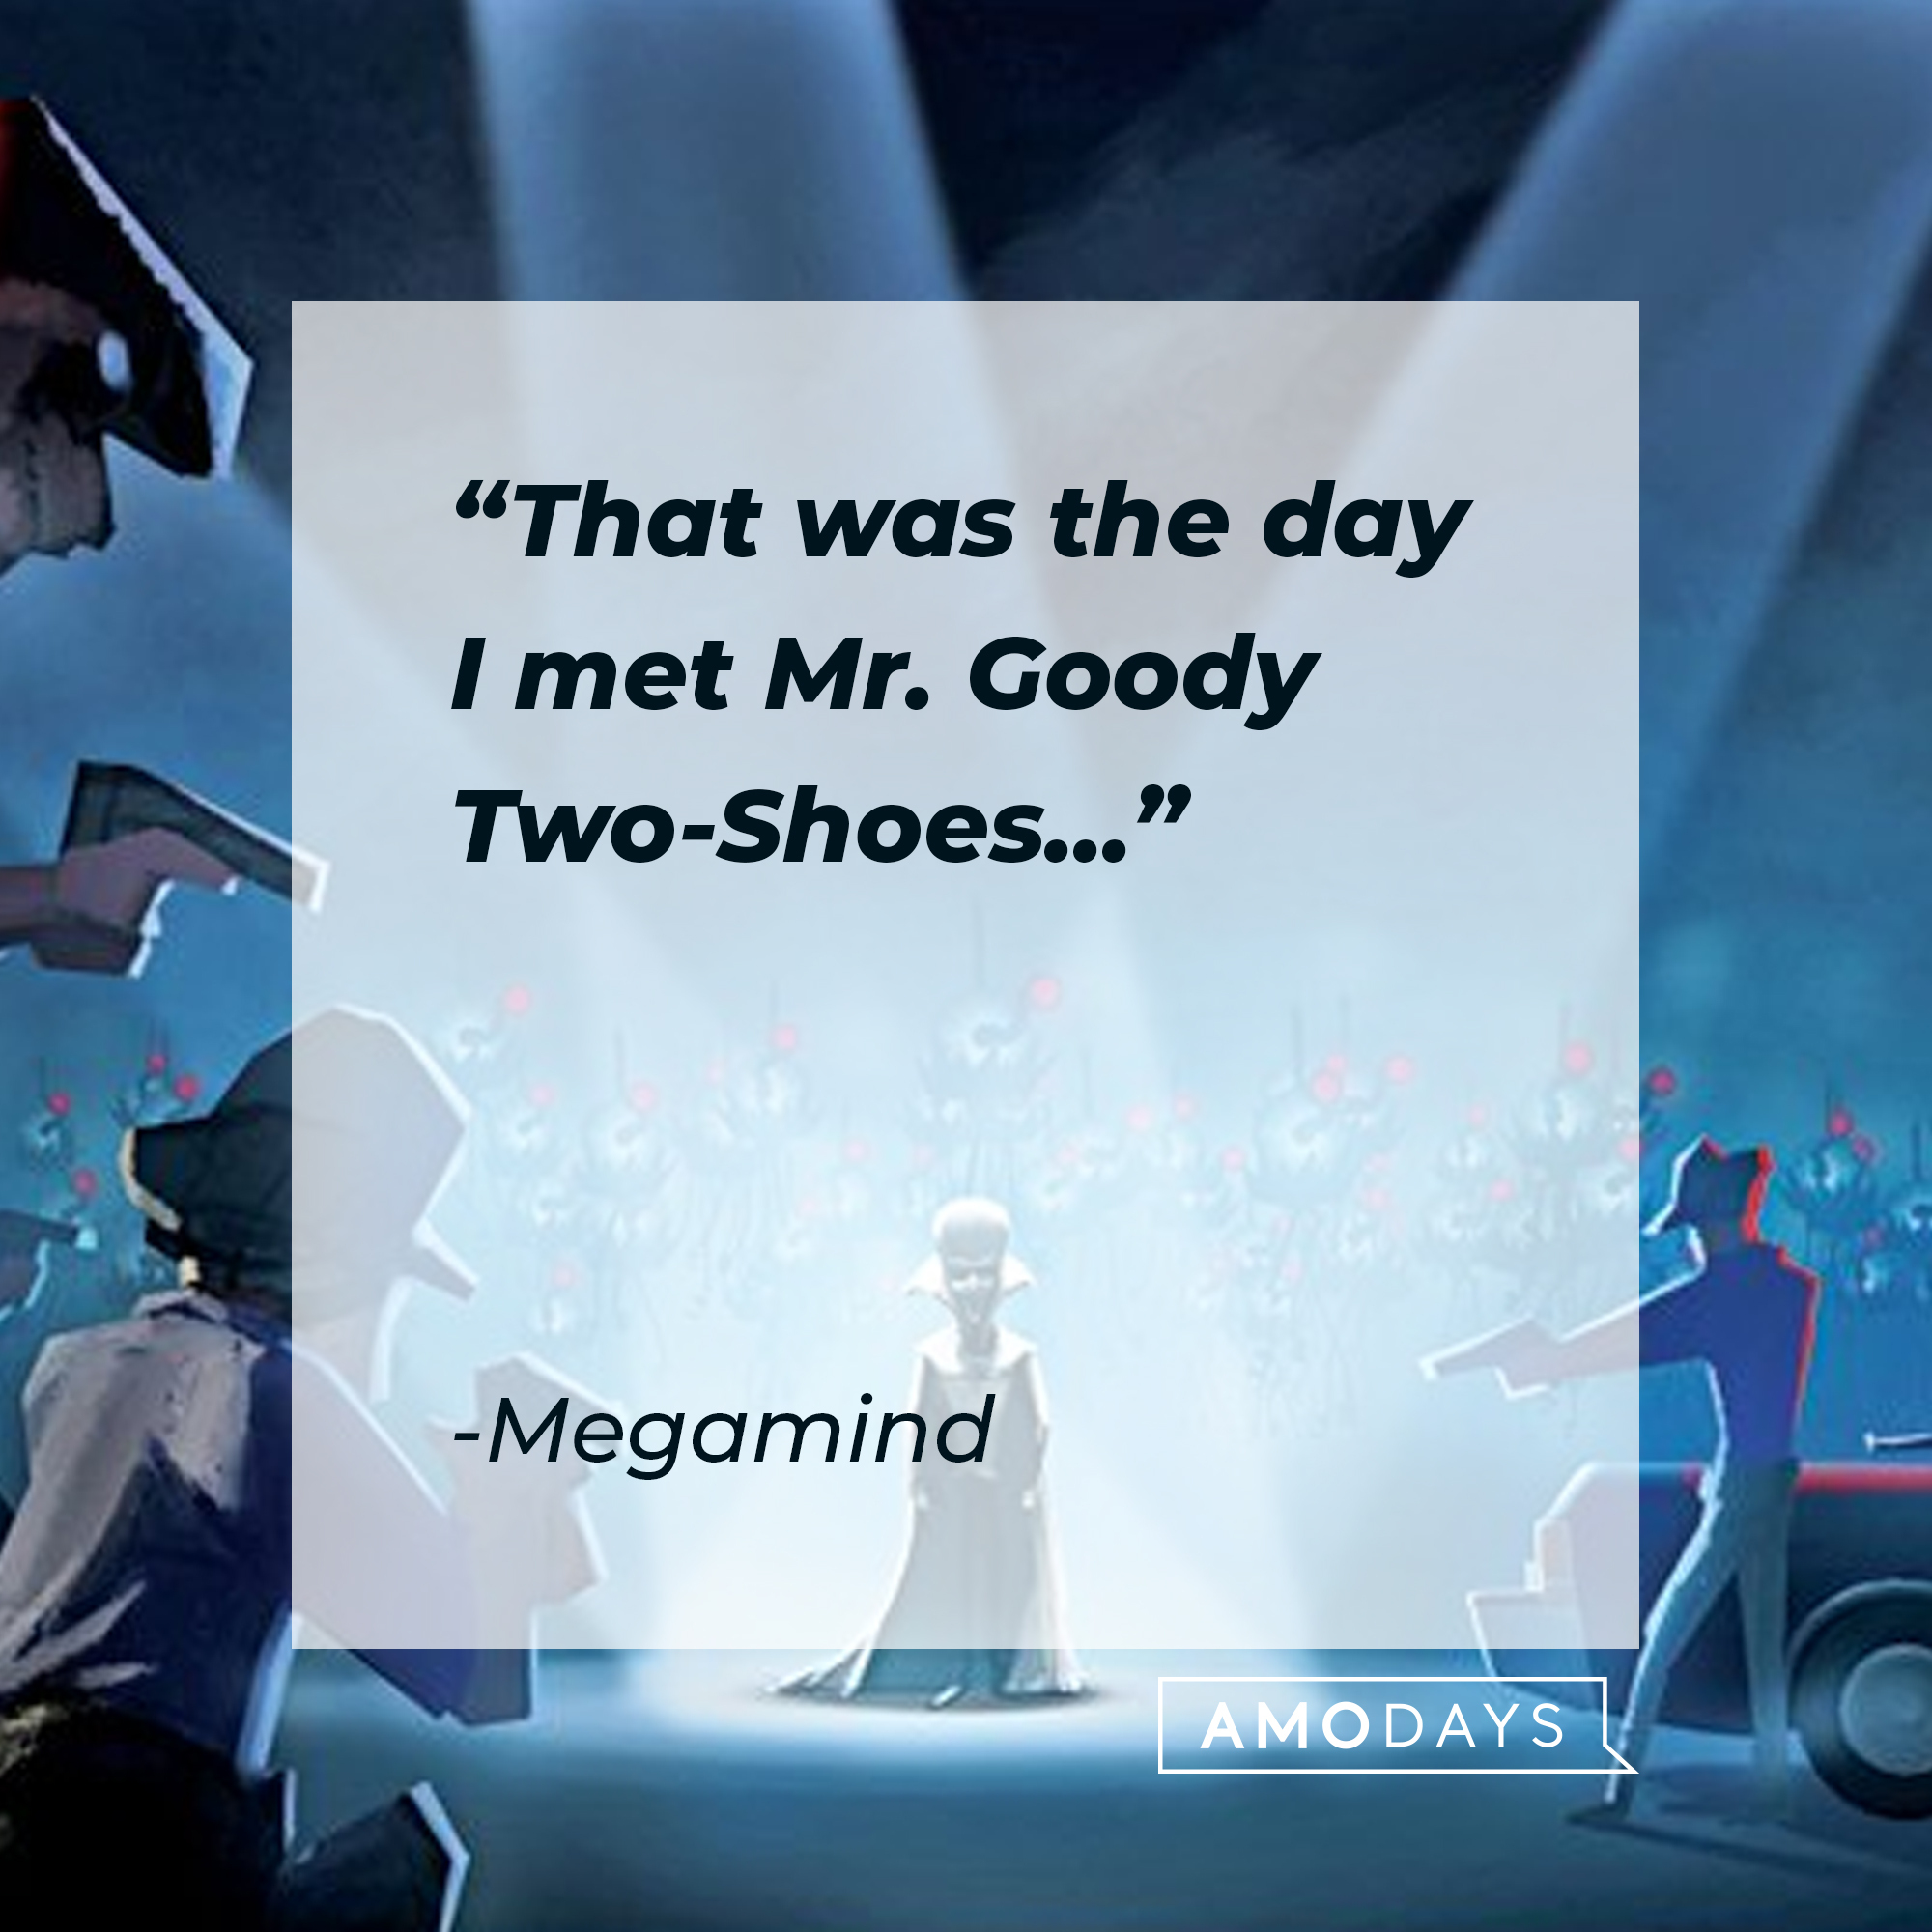 Megamind's quote: "That was the day I met Mr. Goody Two-Shoes..." | Source: Facebook.com/MegamindUK